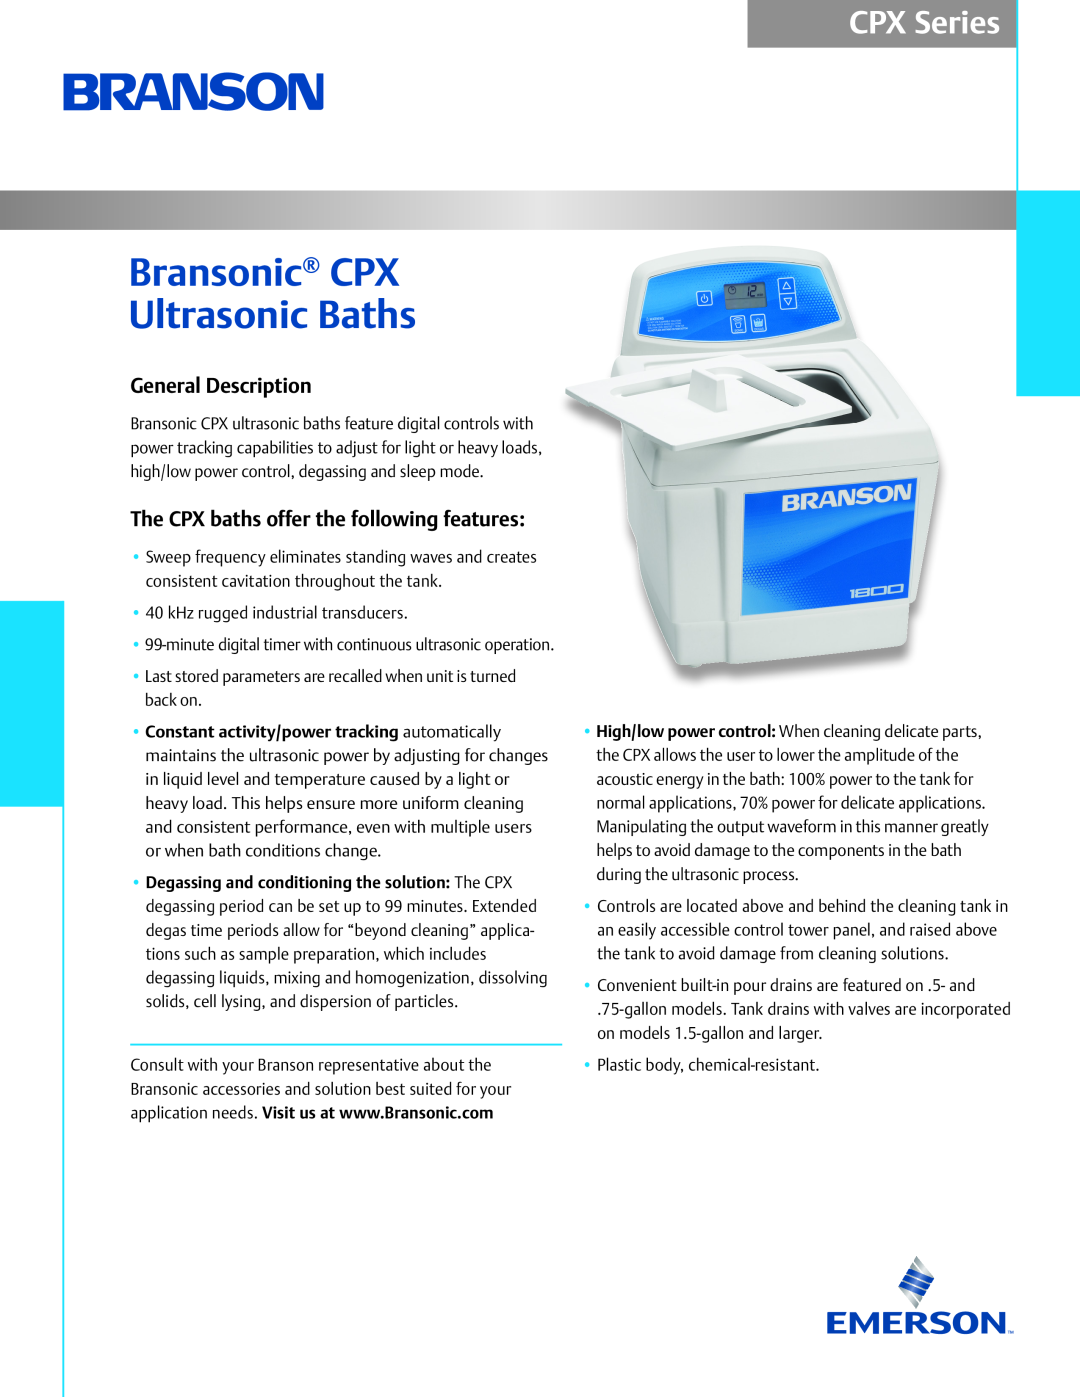 Emerson CPX Series manual Bransonic CPX Ultrasonic Baths, General Description, The CPX baths offer the following features 